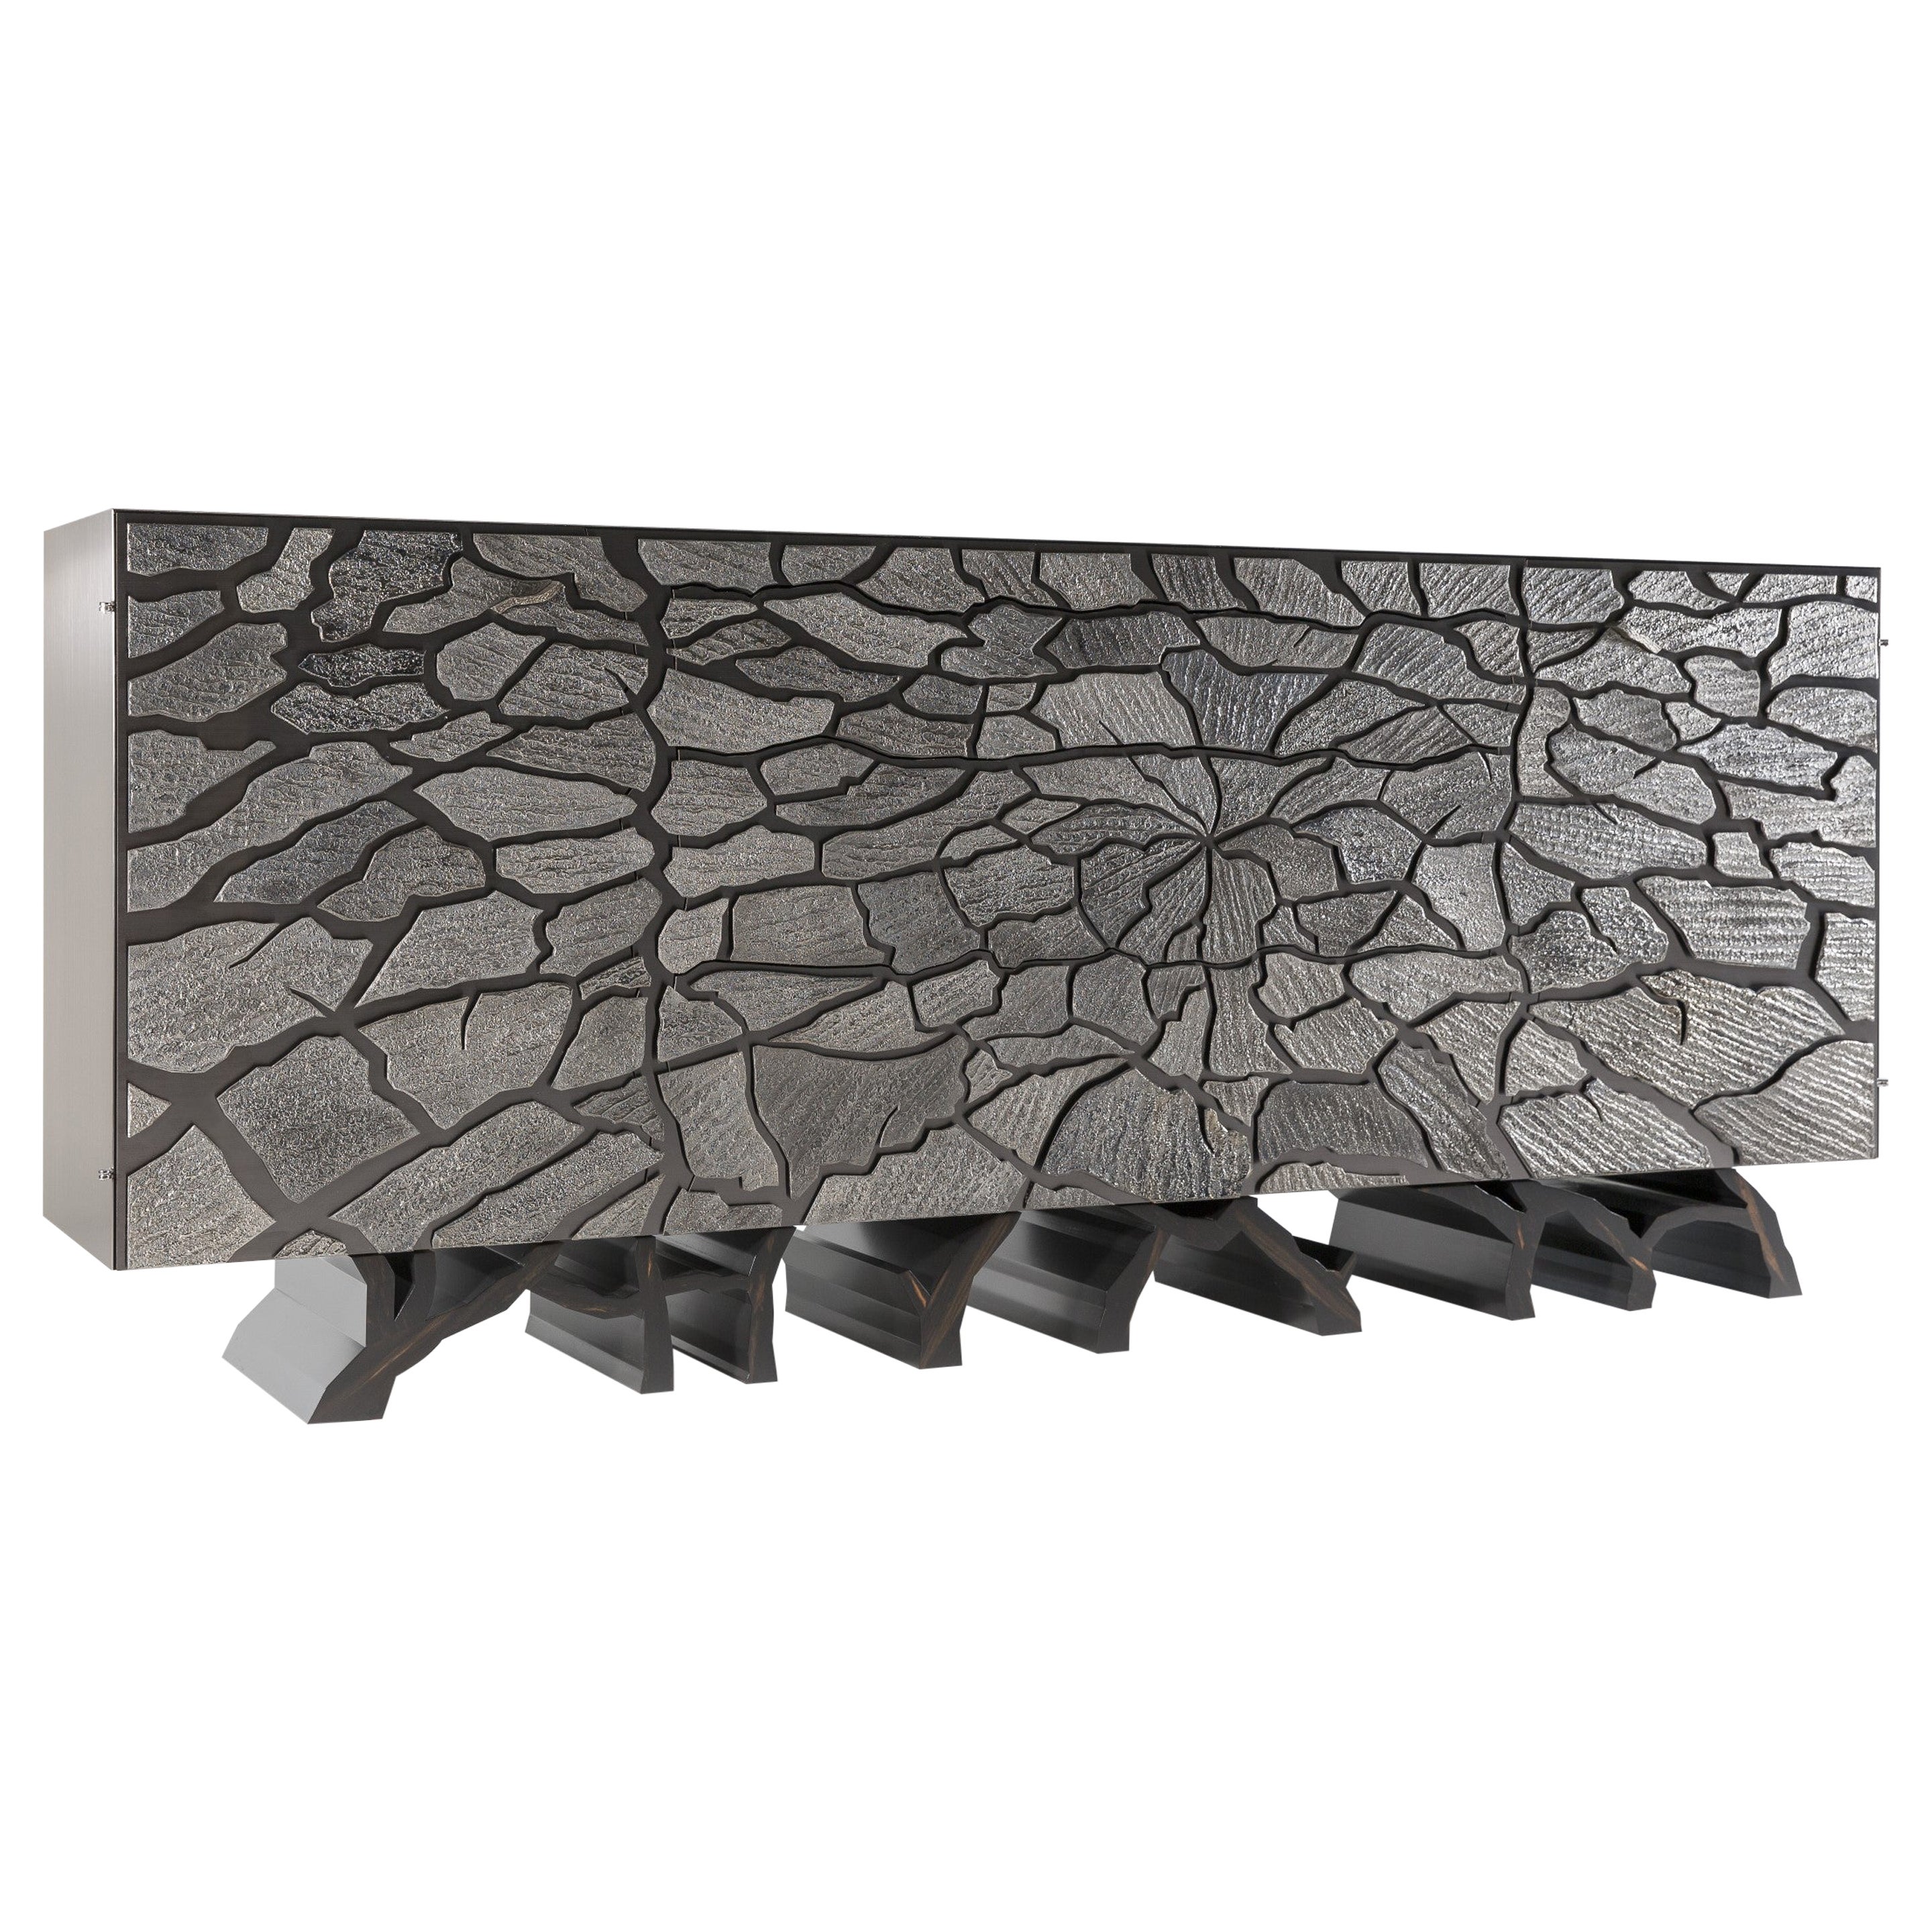 Jean-Luc Le Mounier, Hamada, Contemporary Cabinet in Stainless Steel